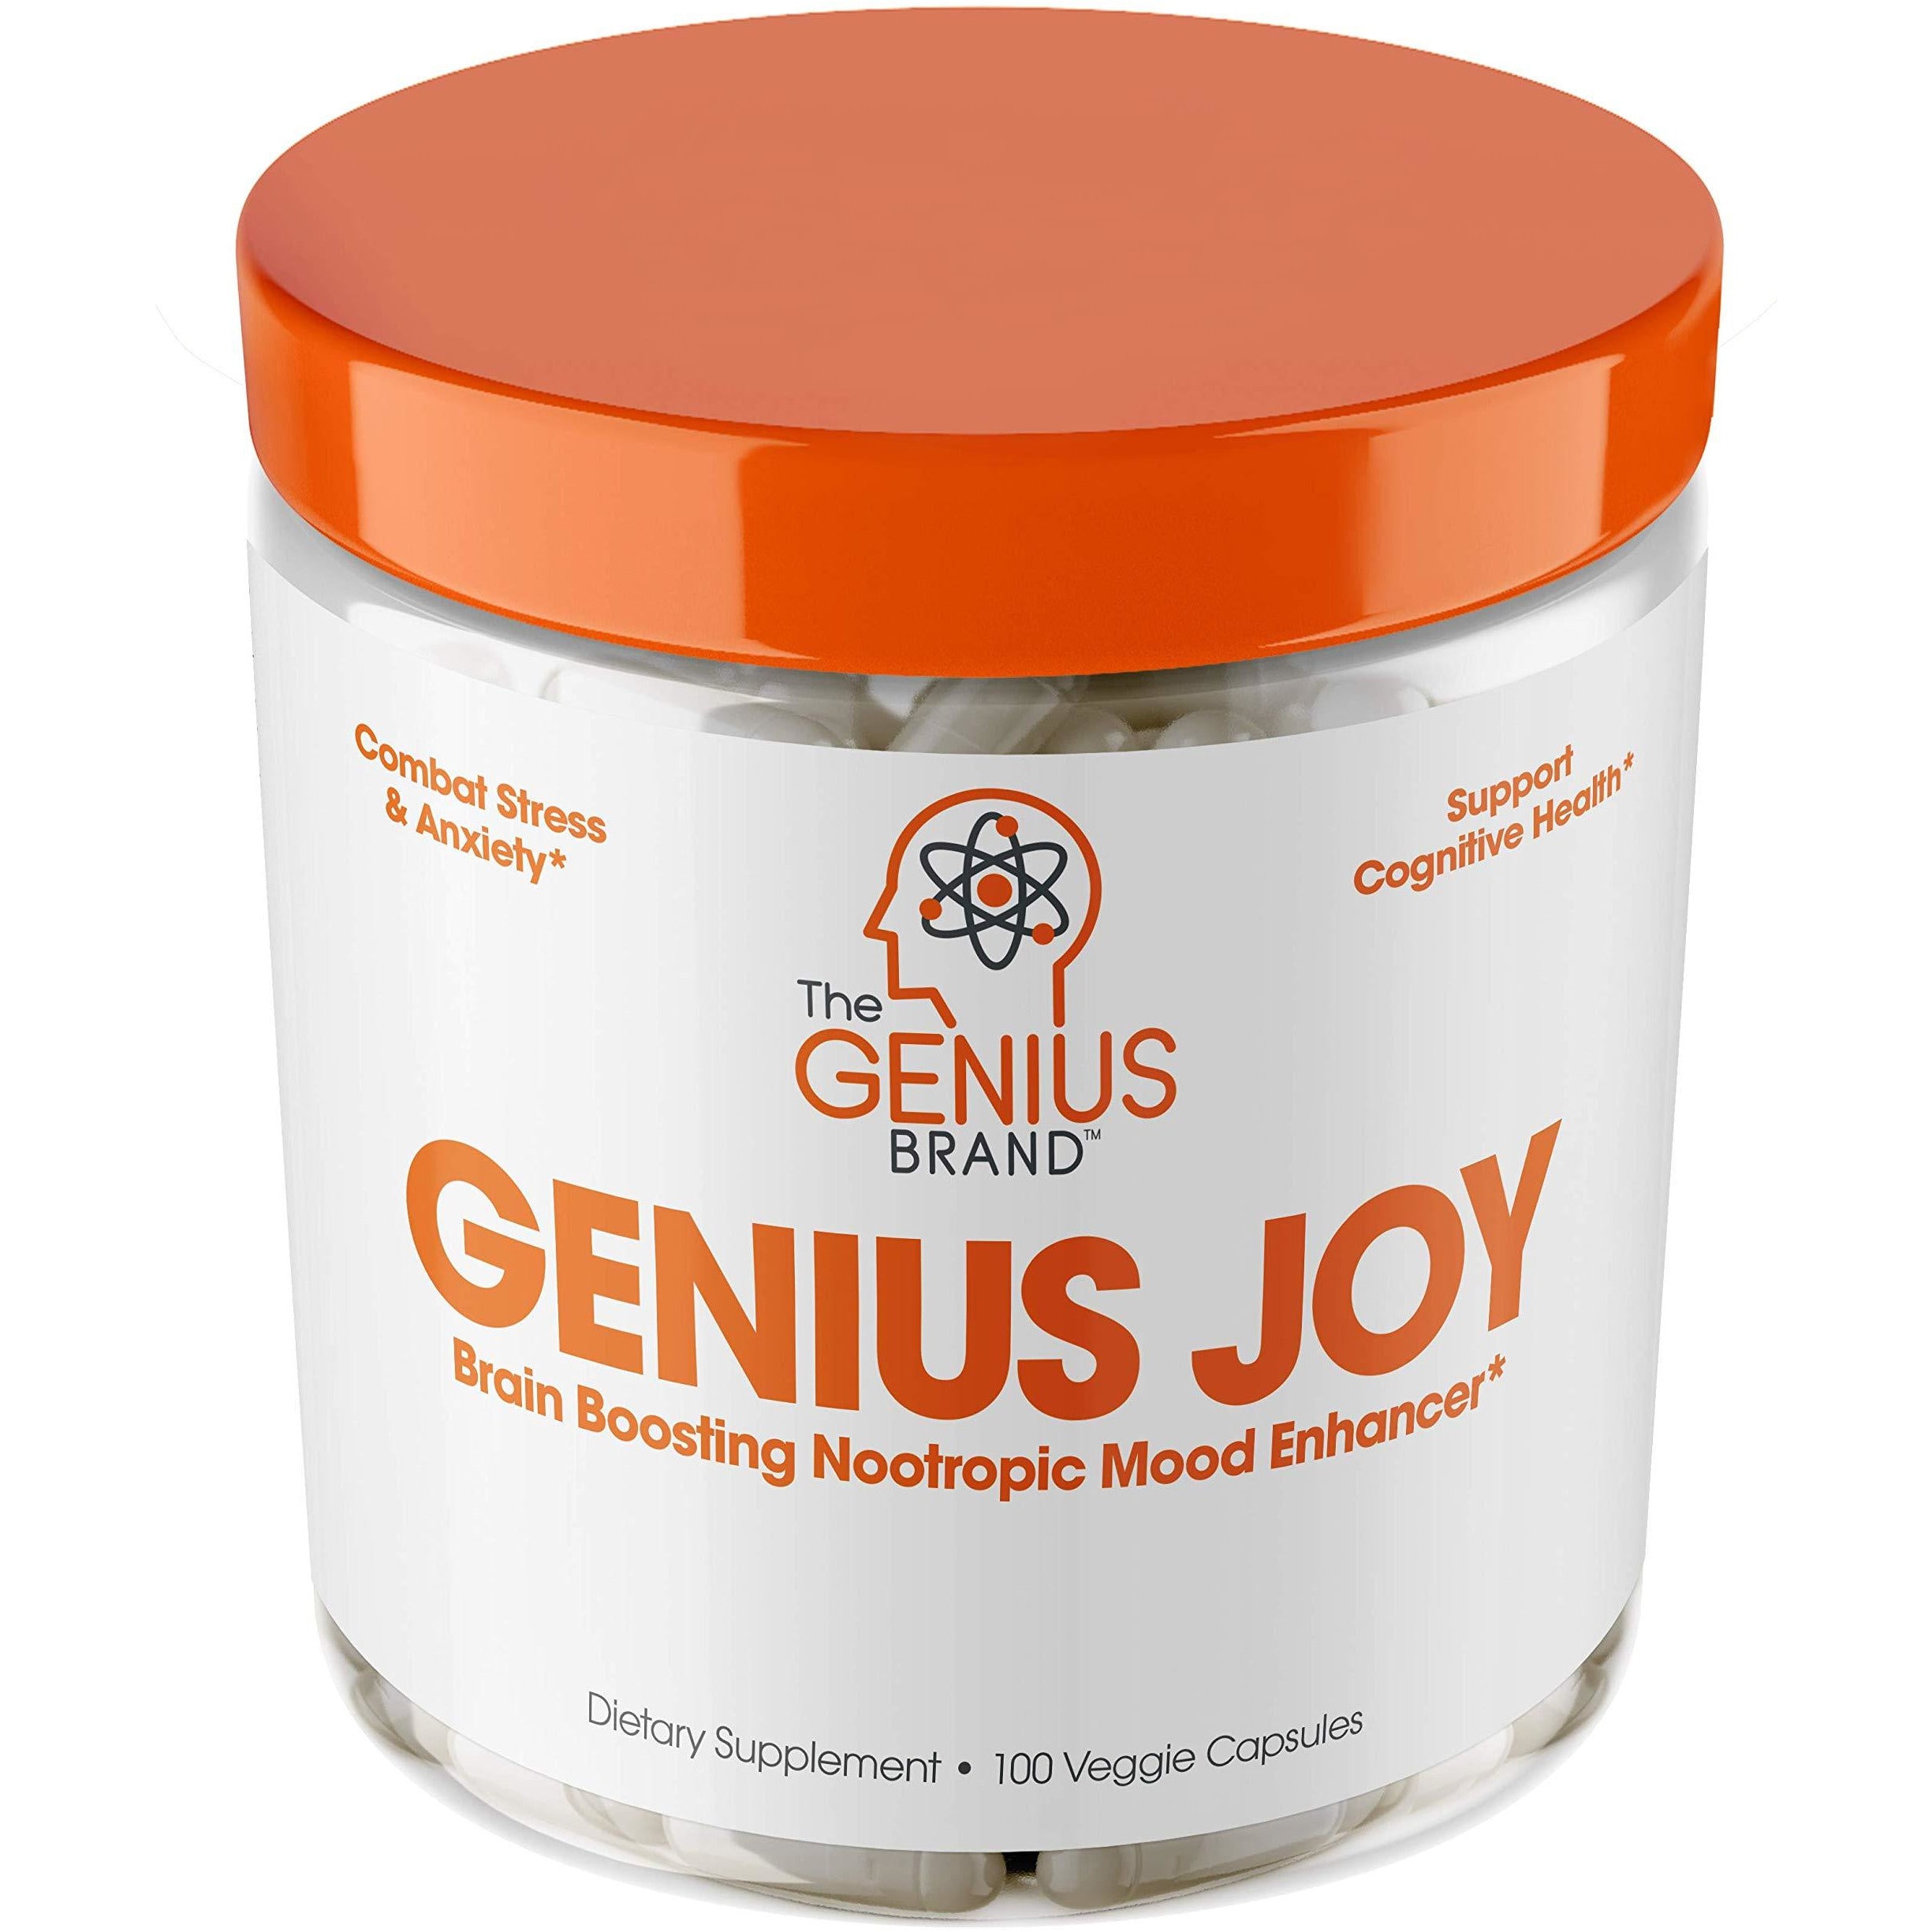 Genius Joy - Serotonin Mood Booster for Anxiety Relief, Wellness & Brain Support, Nootropic Dopamine Stack w/Sam-e, Panax Ginseng & L-Theanine - Natural Anti Stress & Herbal Calm, 100 veggie pills